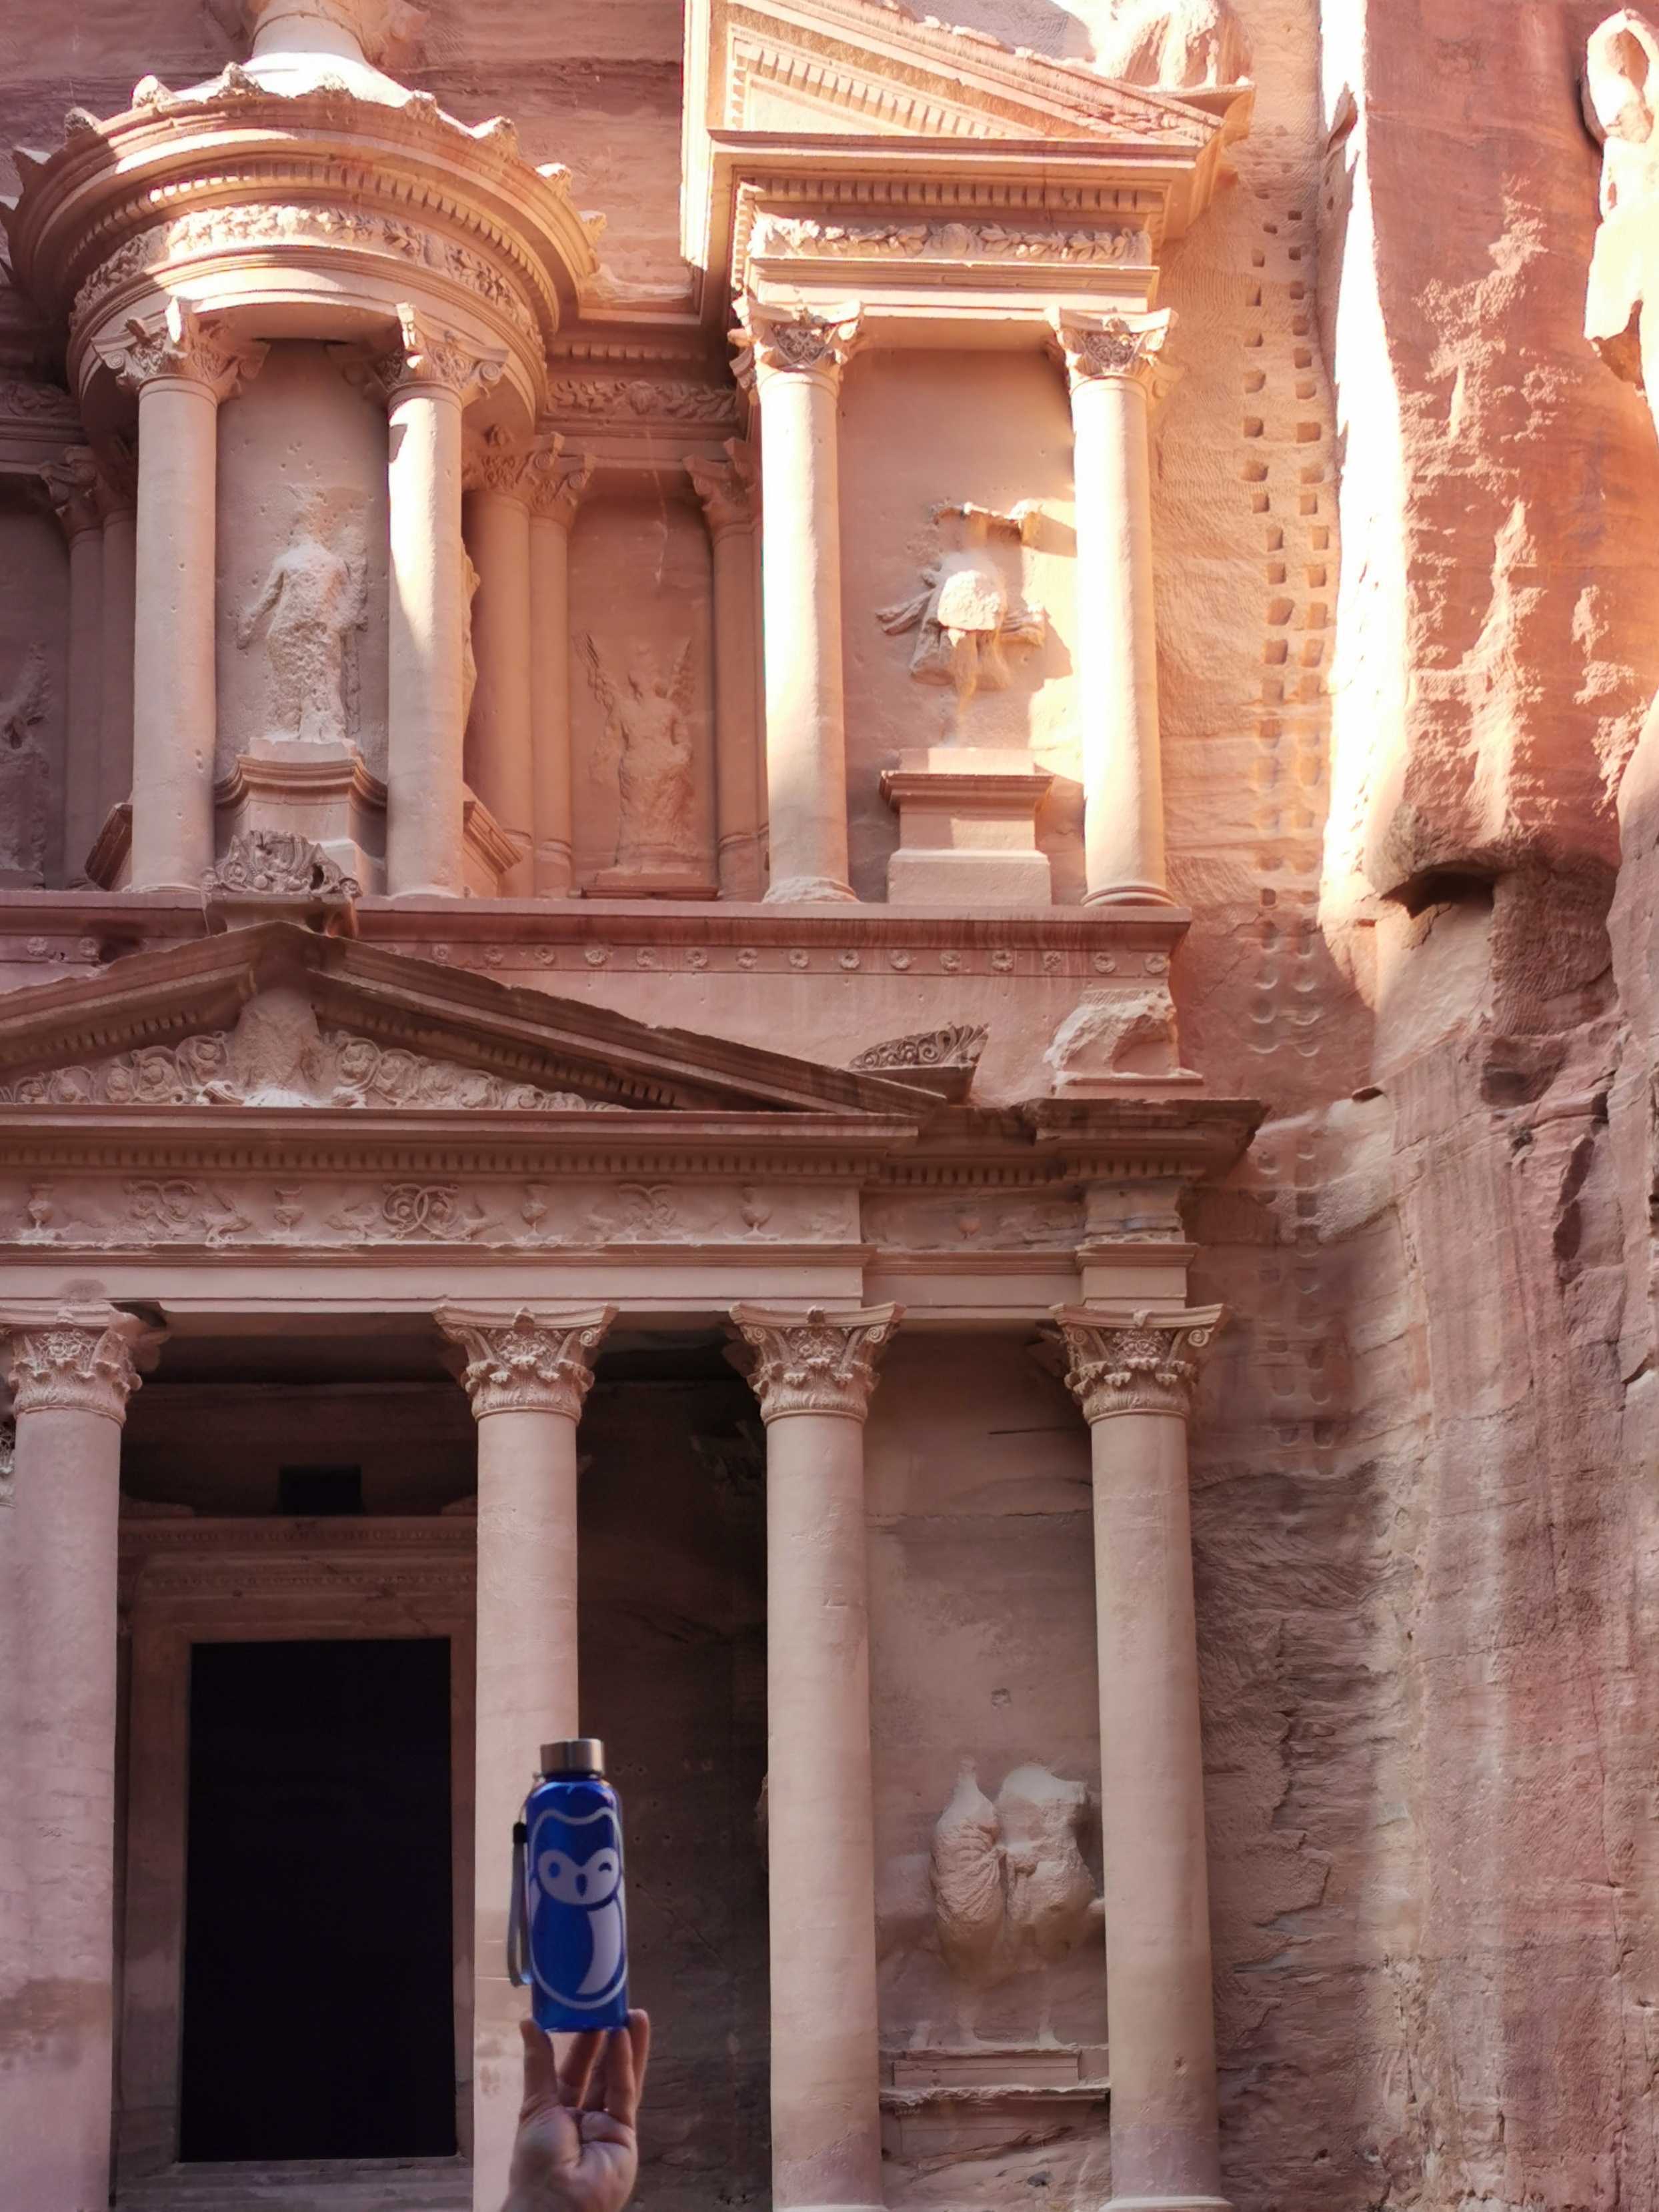 GitGuardian went to check onsite in Petra